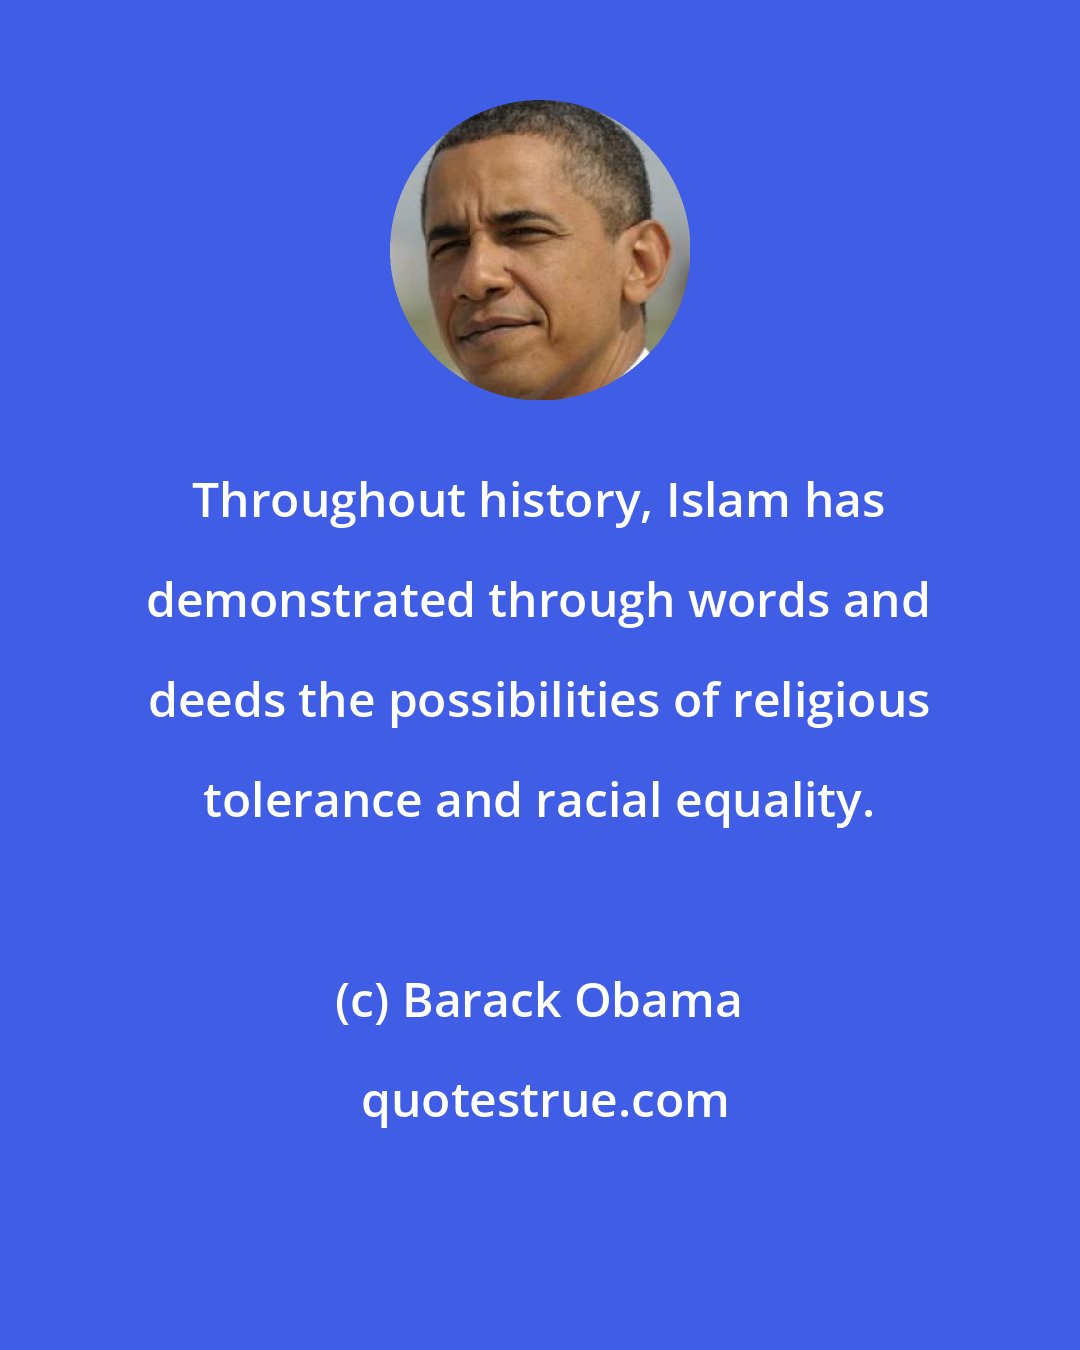 Barack Obama: Throughout history, Islam has demonstrated through words and deeds the possibilities of religious tolerance and racial equality.